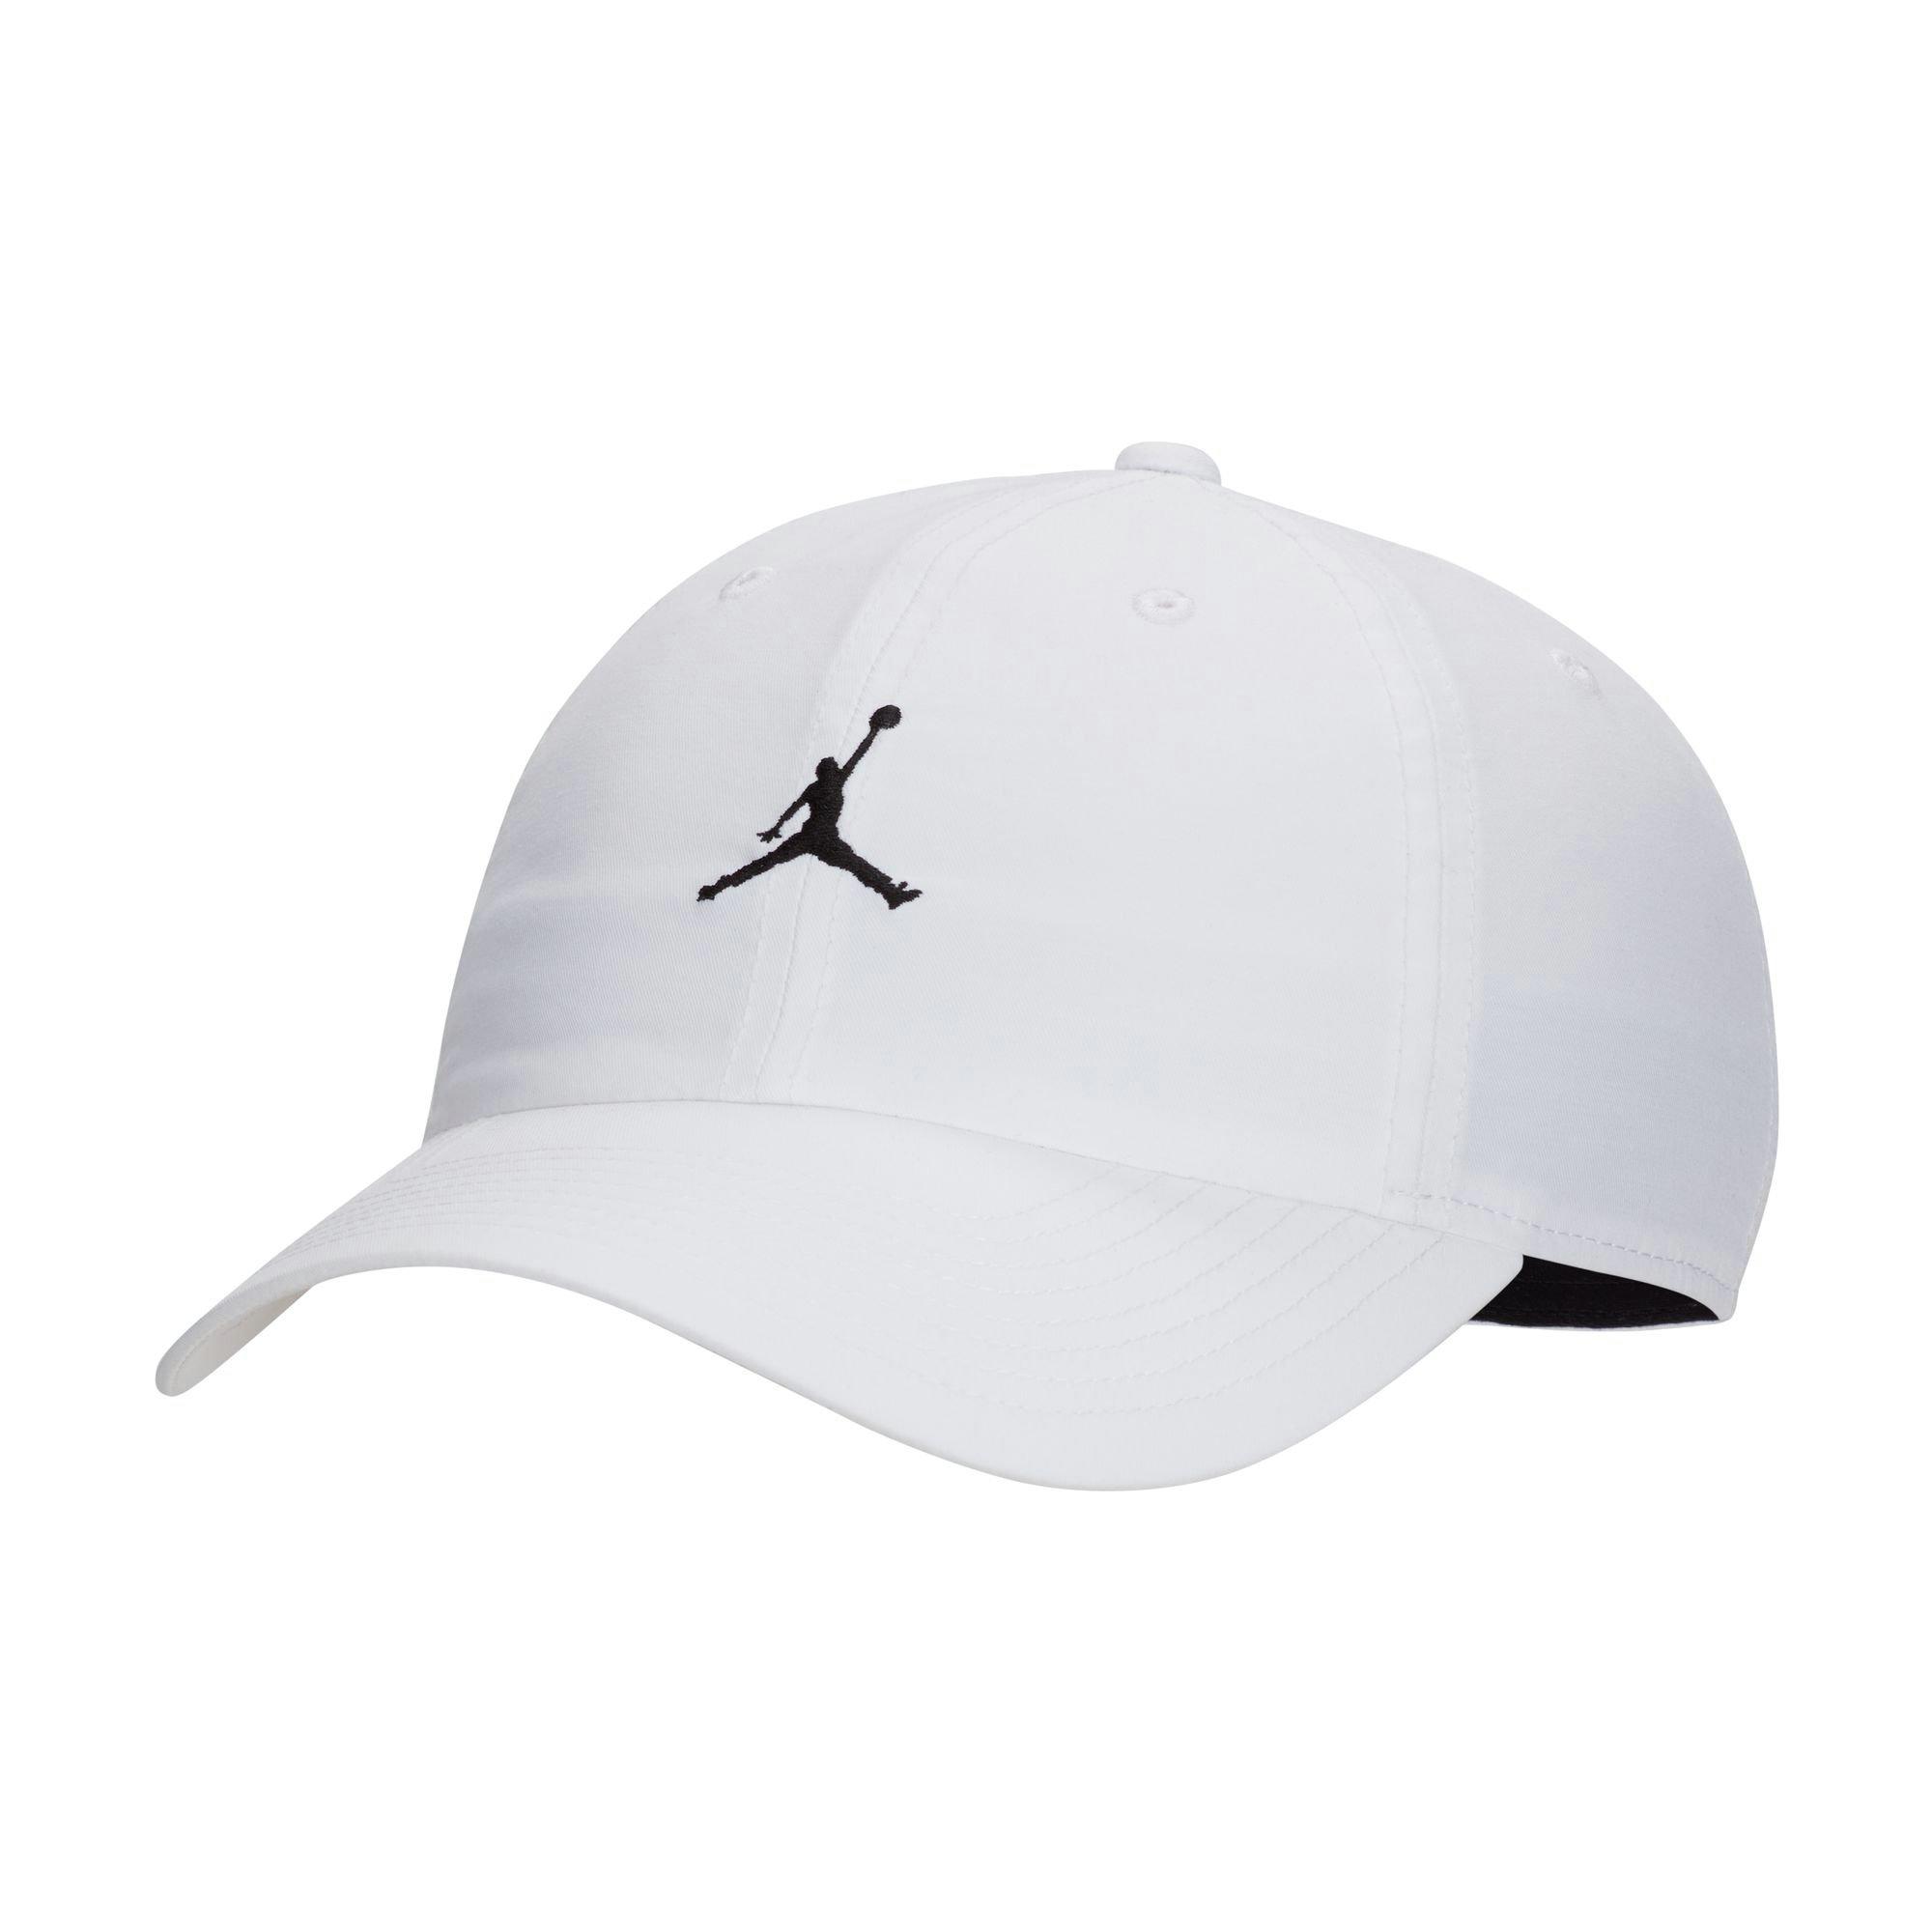 2021 Fashion Basketball Snapback Hats Sports All Teams Caps MenWomen  Adjustable Football Cap Size More Than 10000 Style HHH3845614 From Zagv,  $11.27